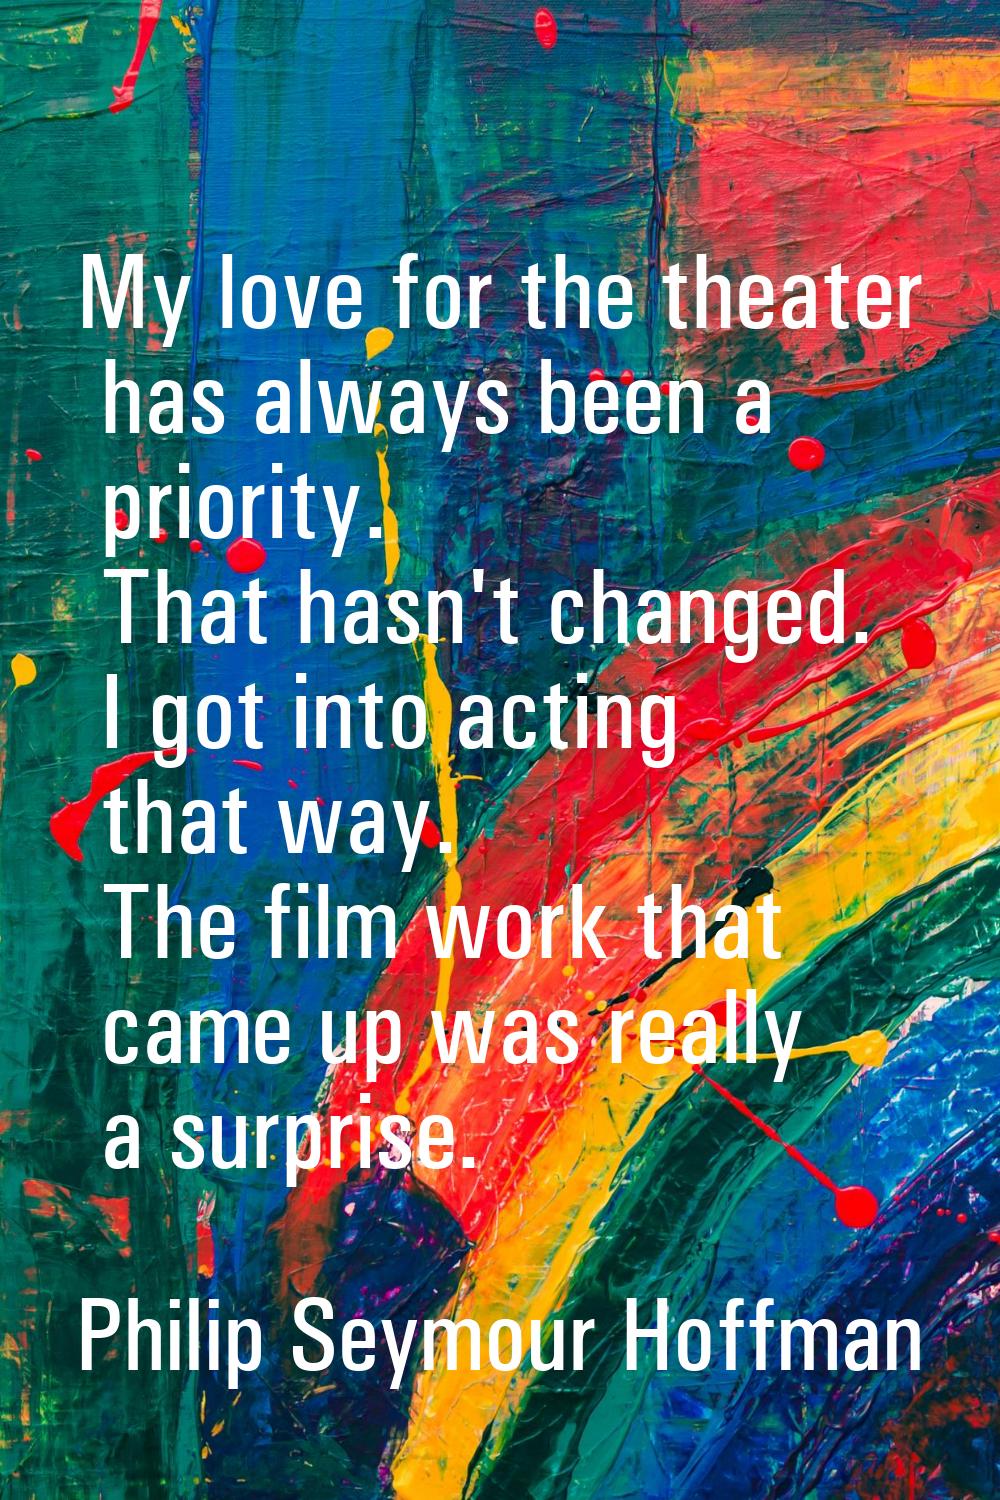 My love for the theater has always been a priority. That hasn't changed. I got into acting that way